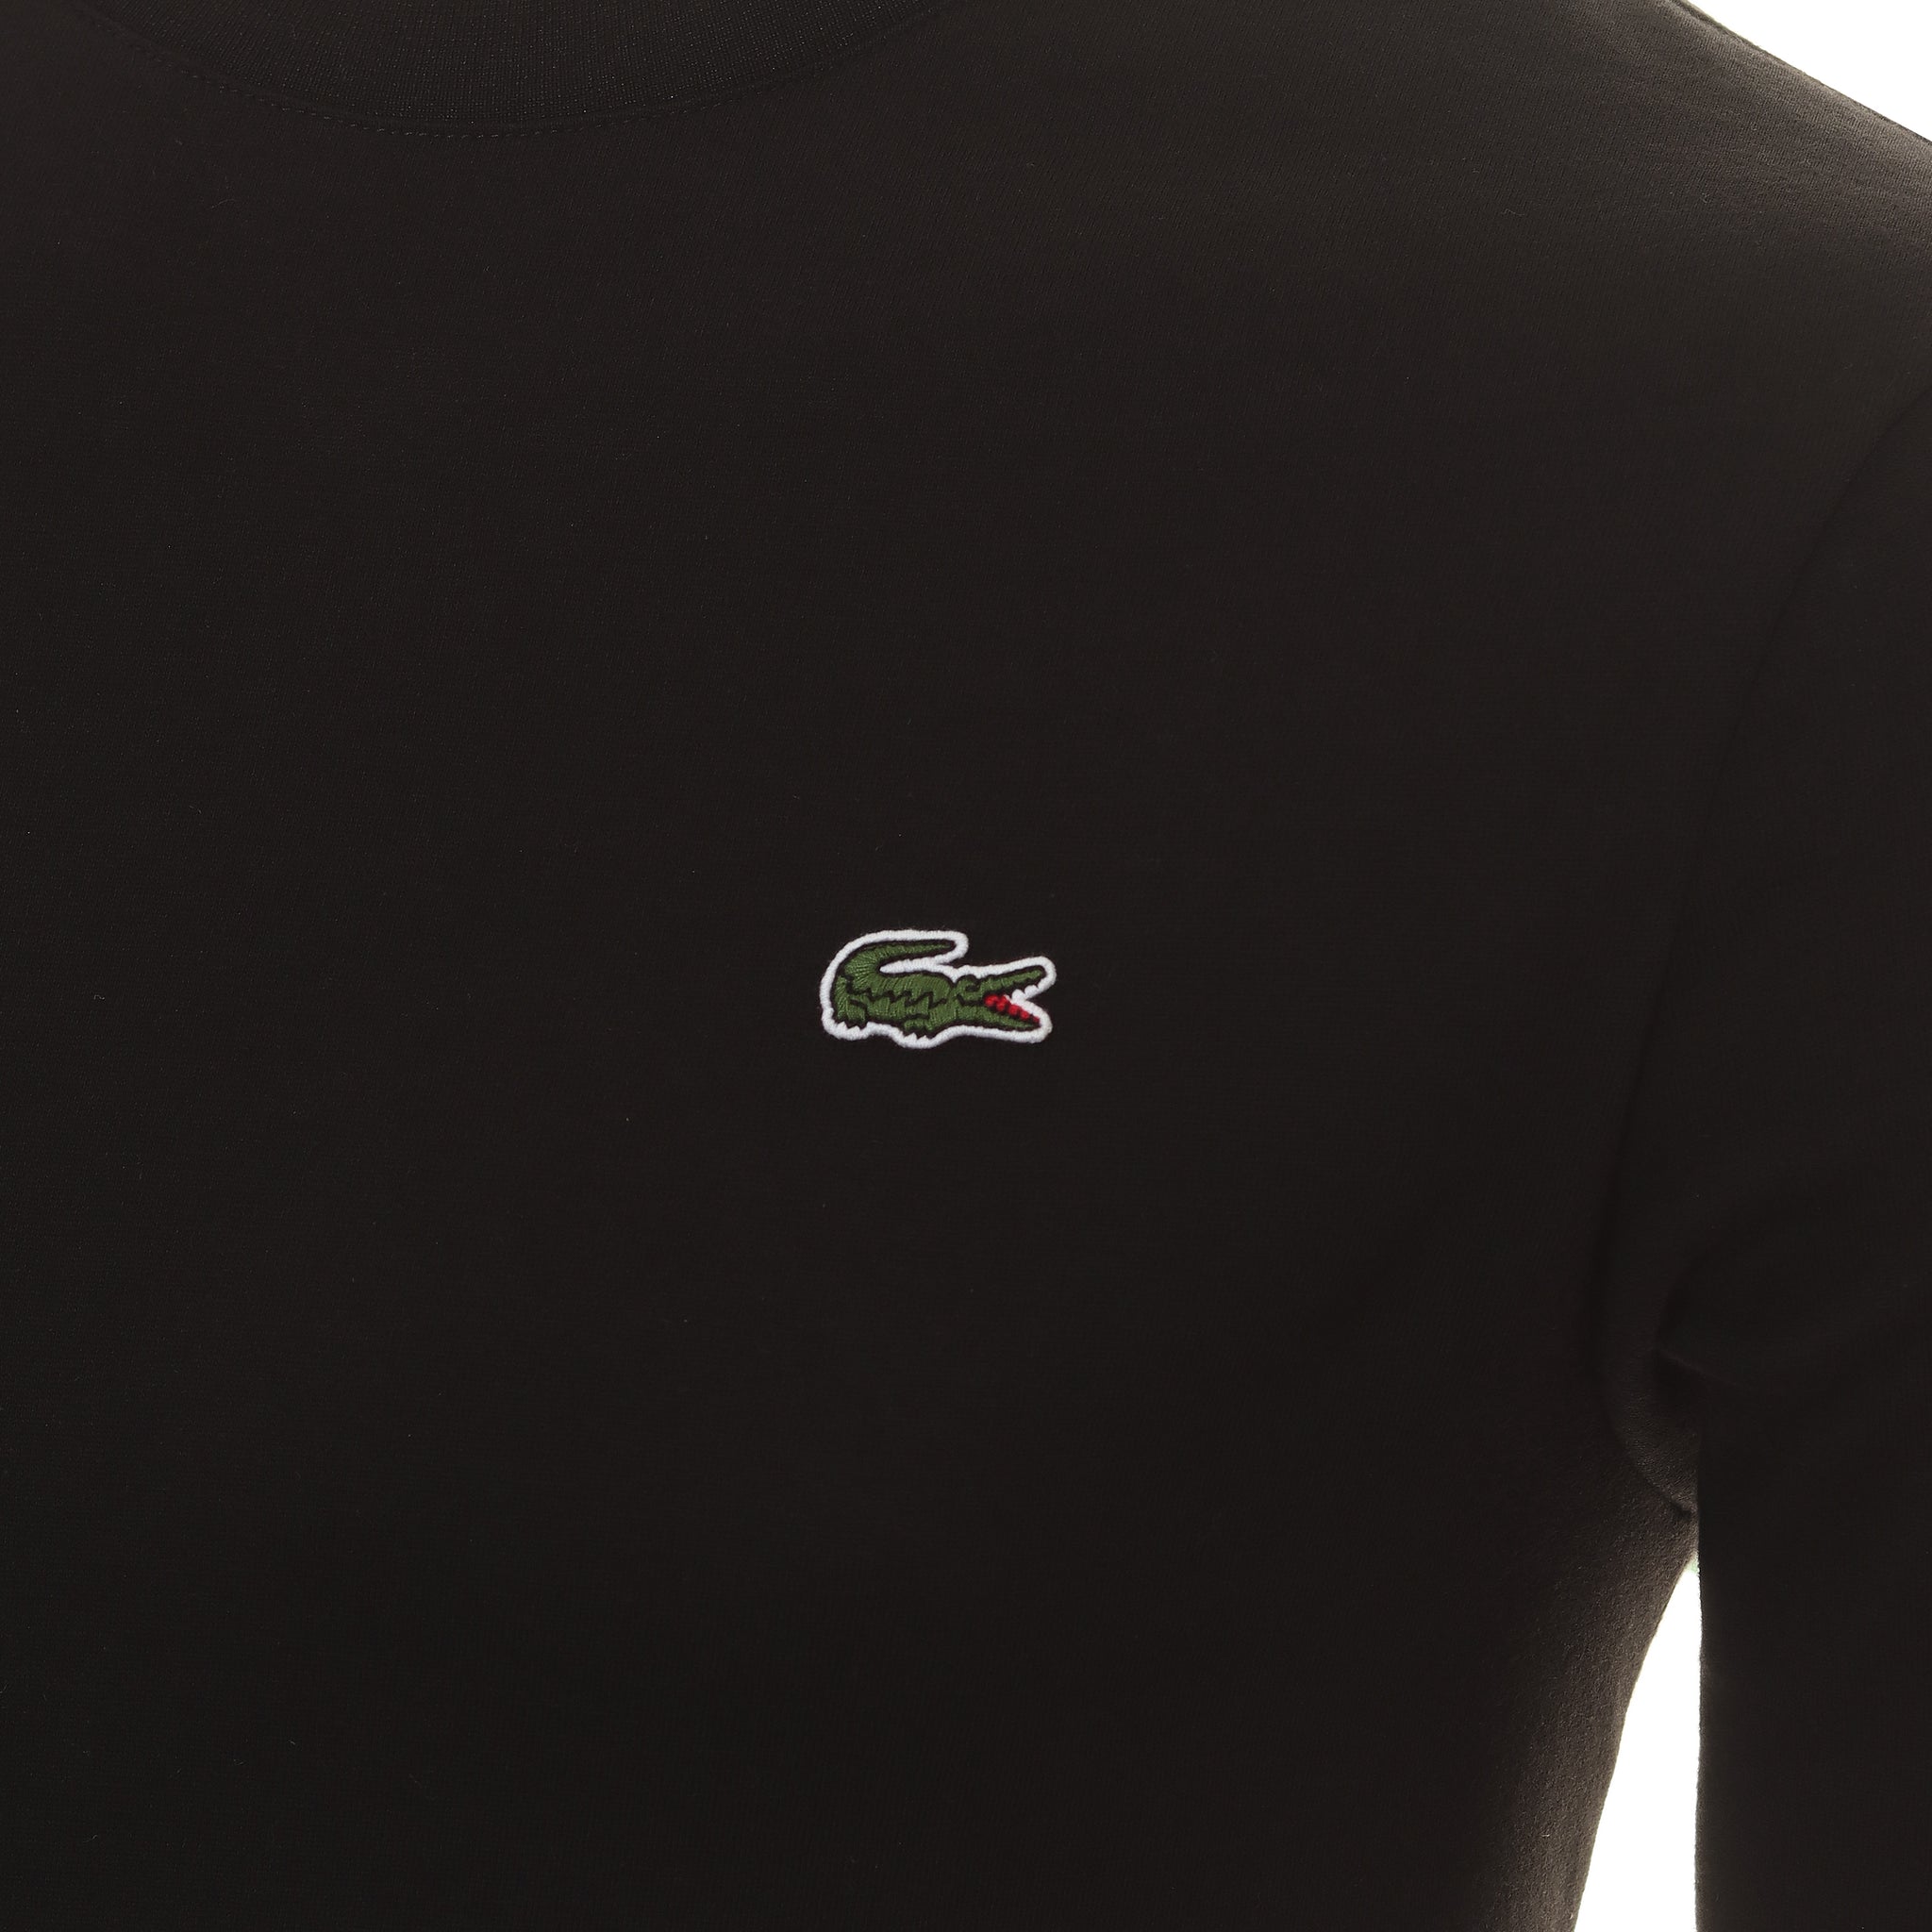 Lacoste Long Sleeve Tee Shirt TH3662 Black 031 | Function18 | Restrictedgs